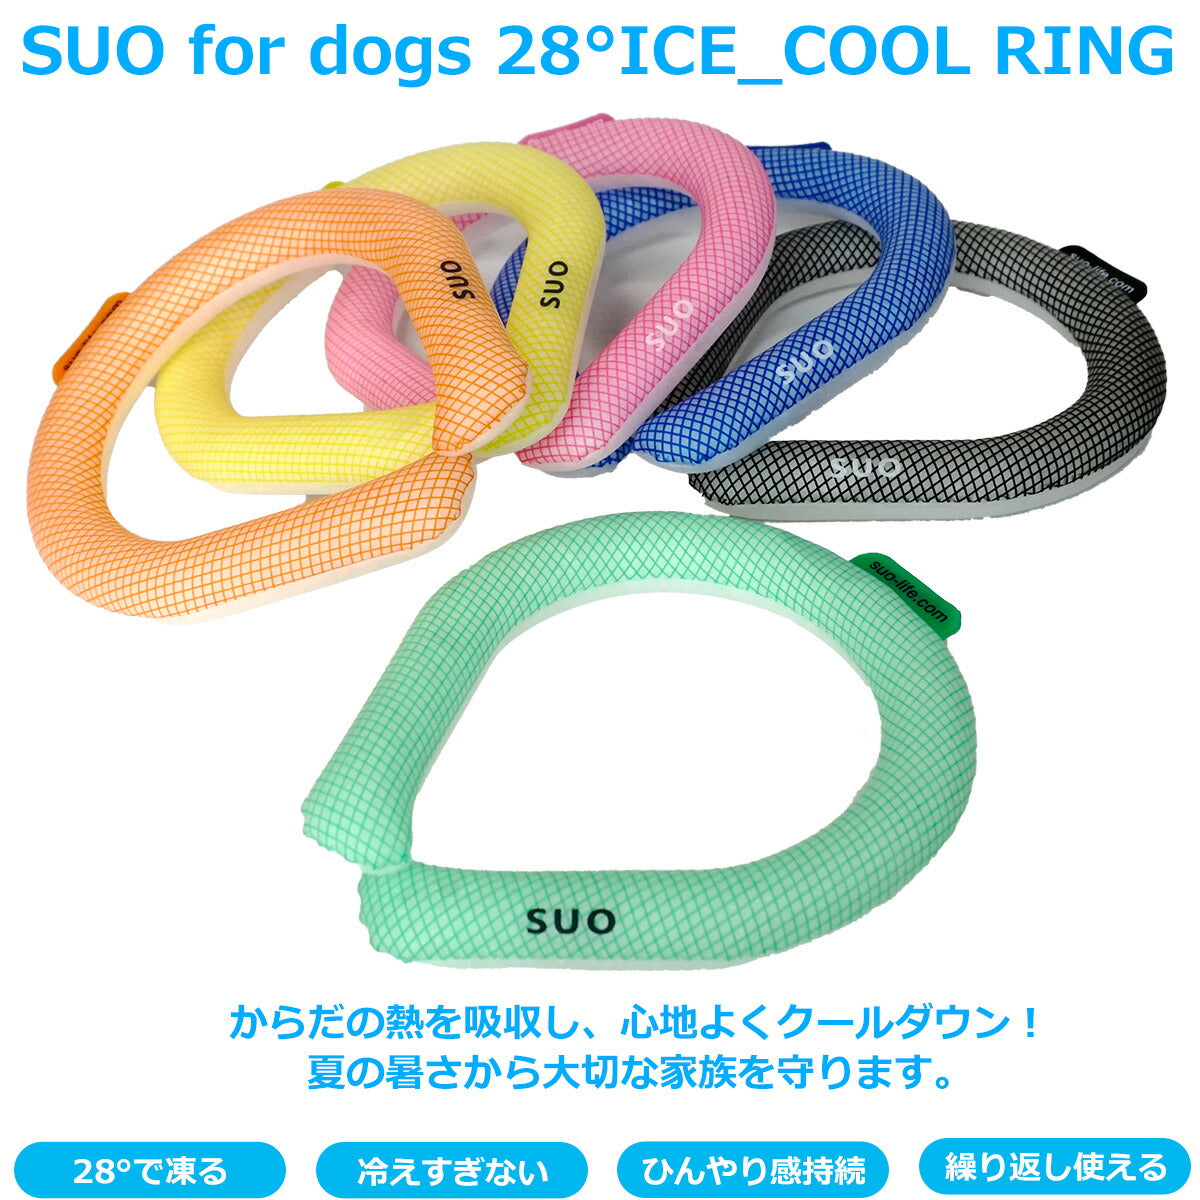 SUO for dogs 28°ICE SUOリング ボタンなし SS ピンク 熱中症対策グッズ 暑さ対策 ひんやり 首 冷感 犬 大人 子供